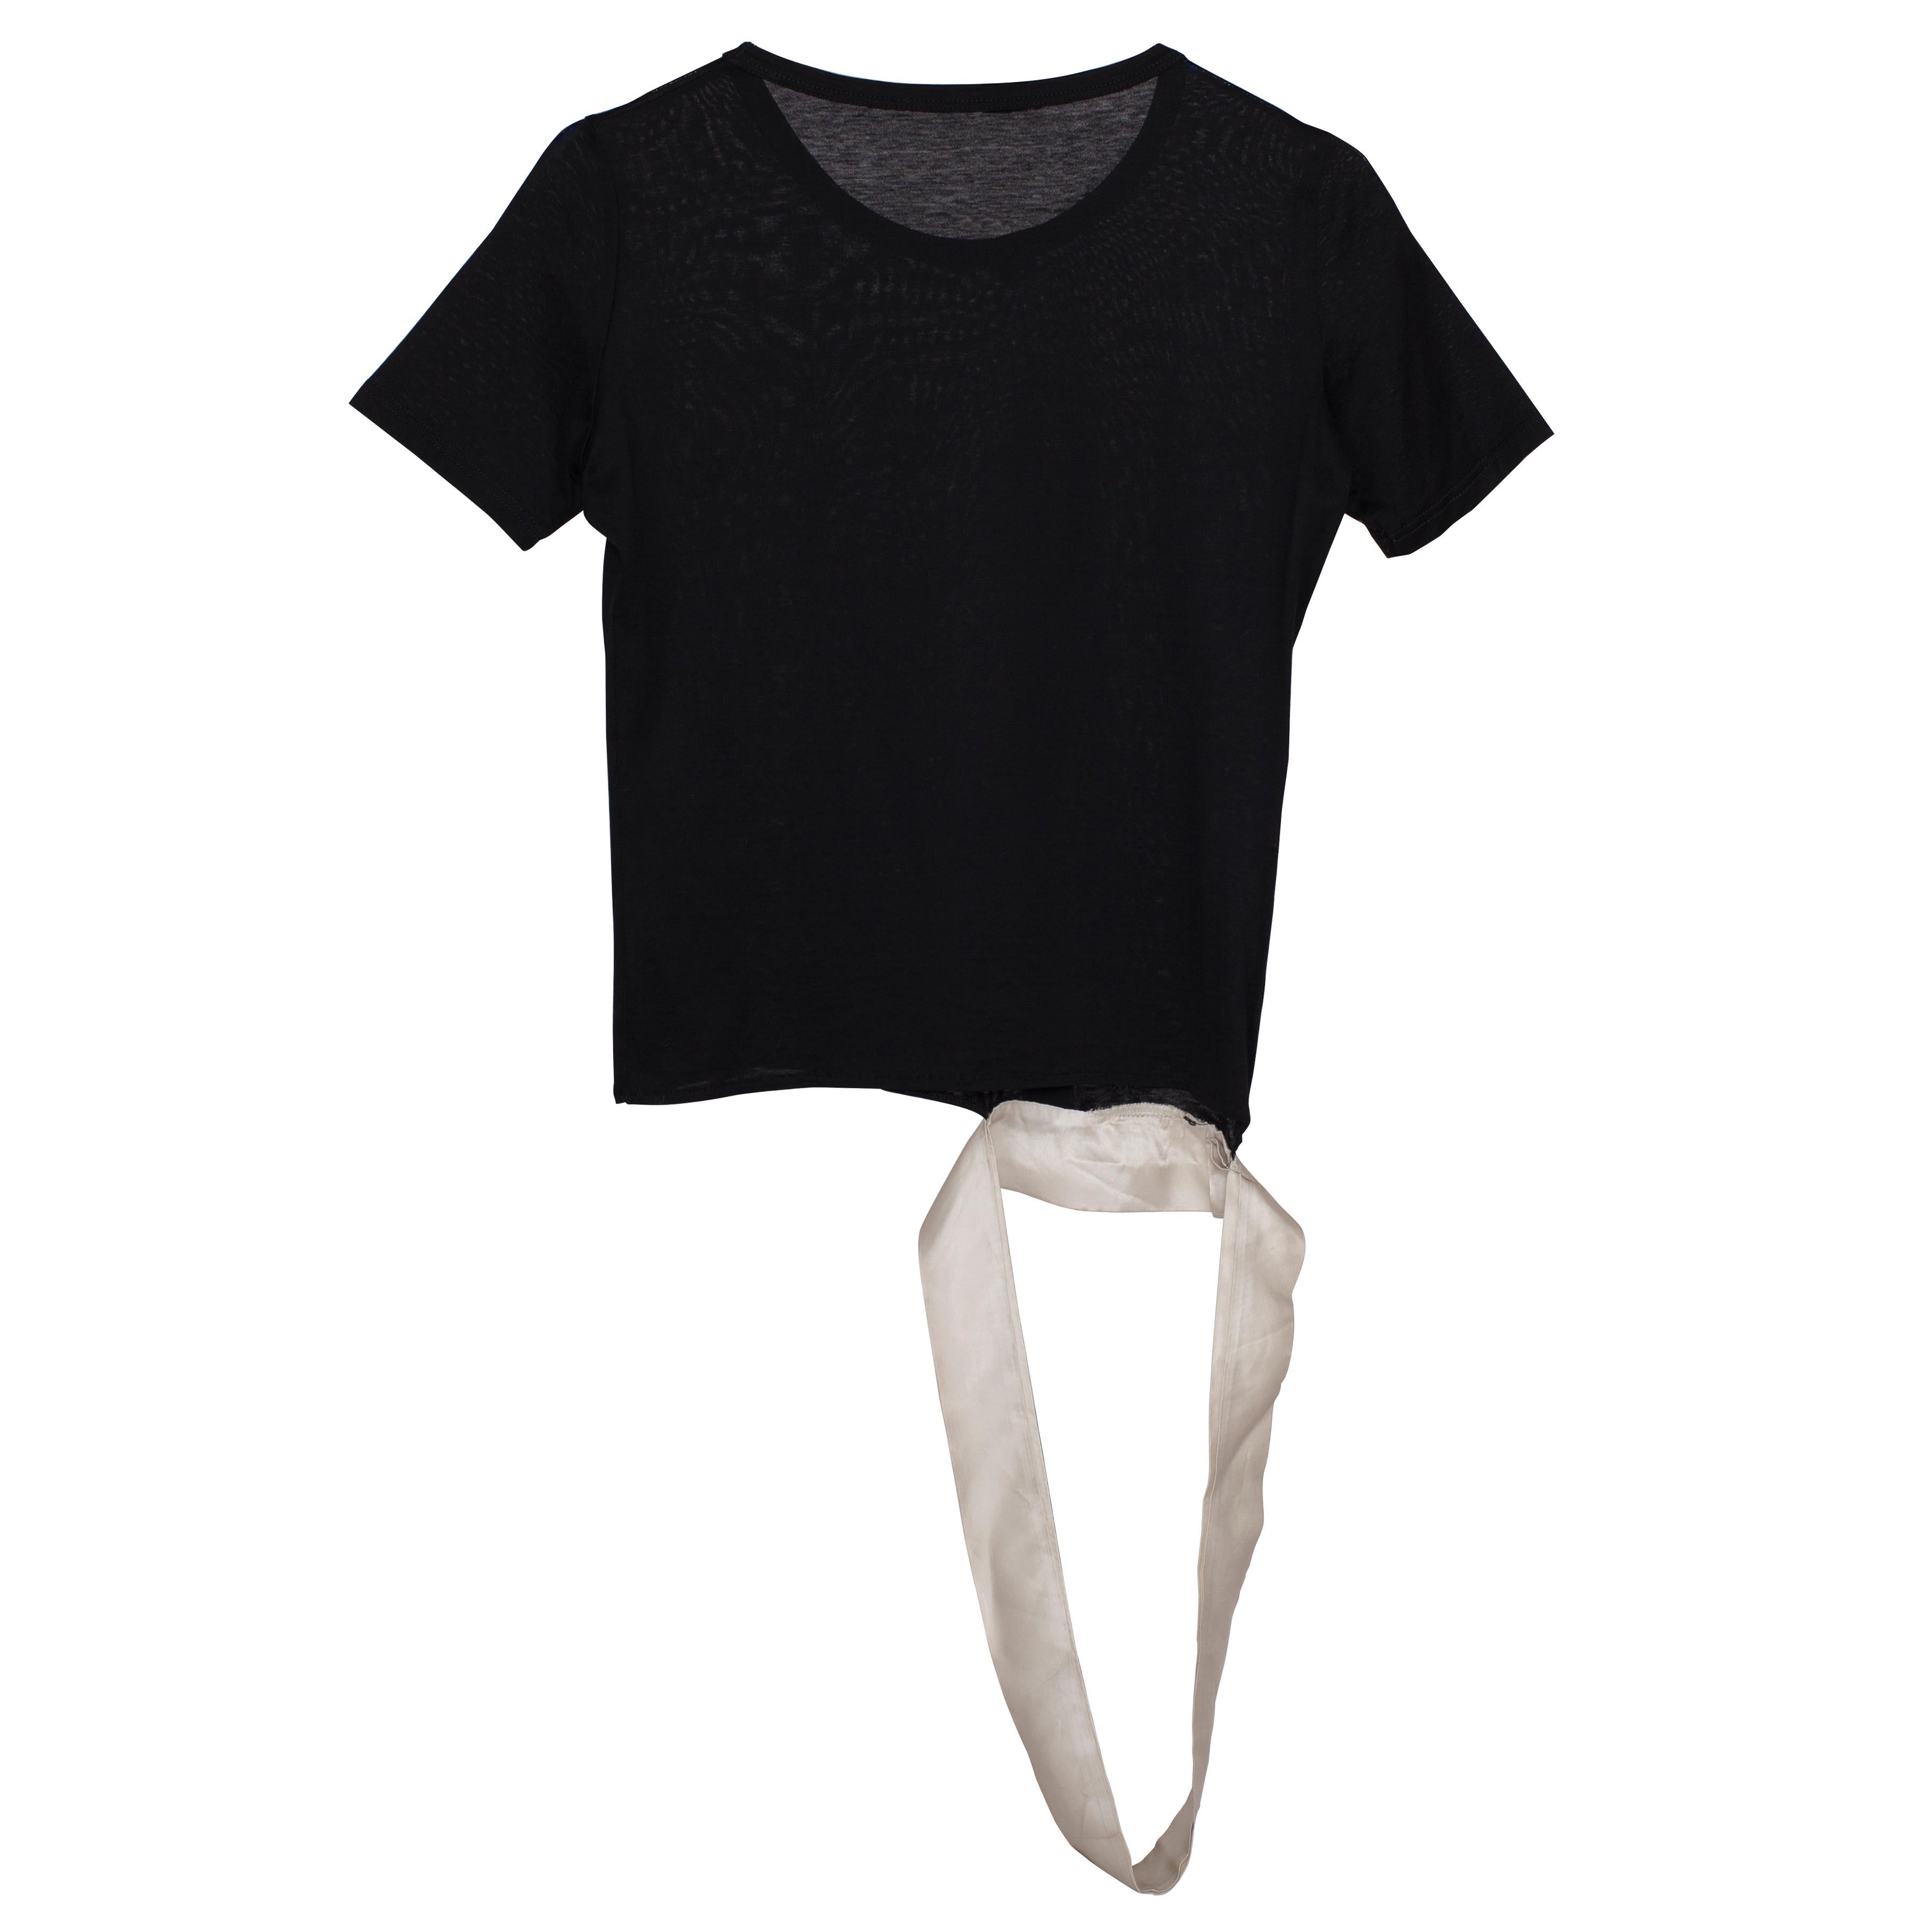 Archival Helmut Lang black T shirt with white satin cutout hem panel detail from SS 1997.
Tag missing on the neck line, only side tag remains.







